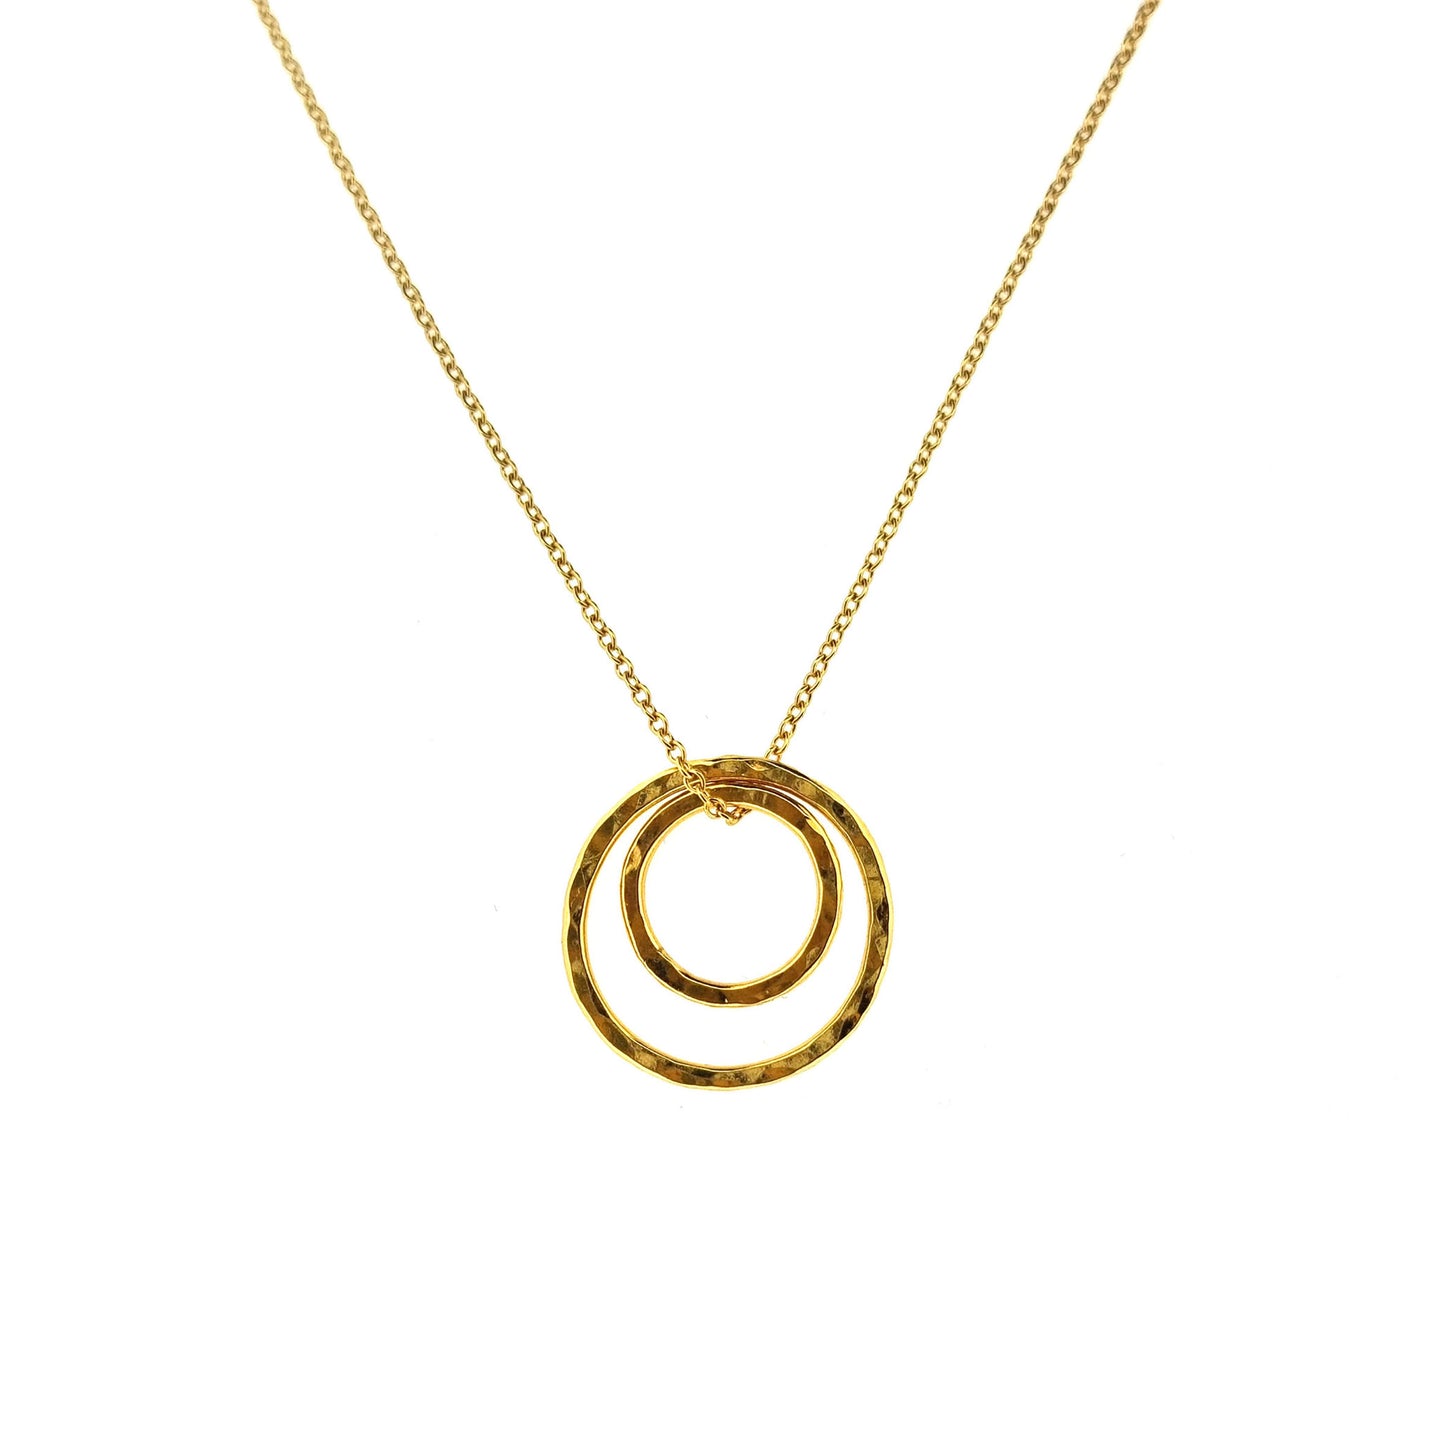 Yellow gold vermeil double open circle pendant on a yellow gold vermeil chain.